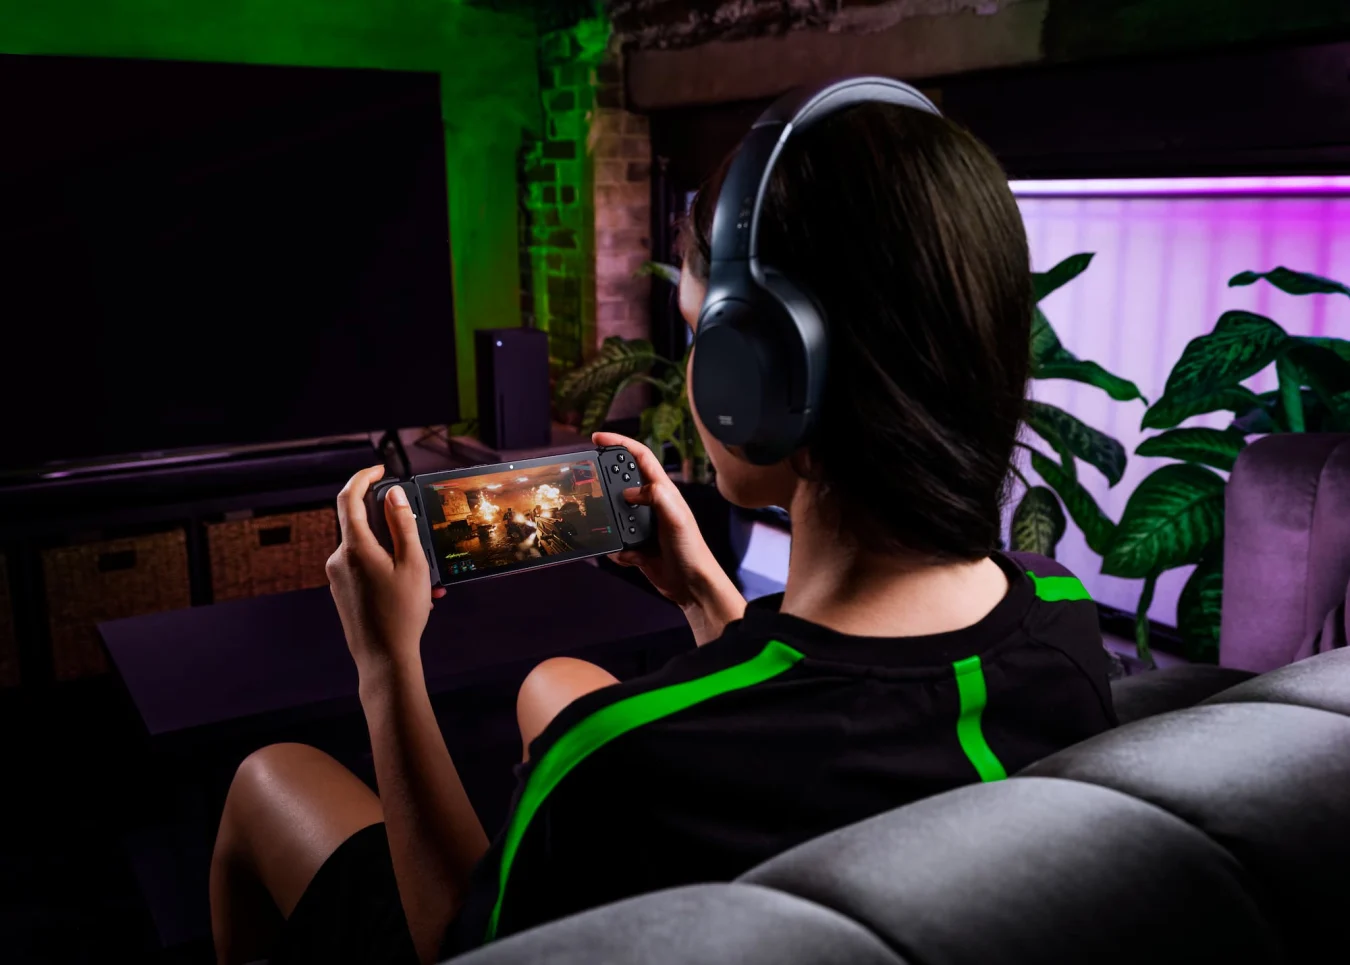 Person sitting on couch wearing headphones and holding Razer Edge handheld gaming device.